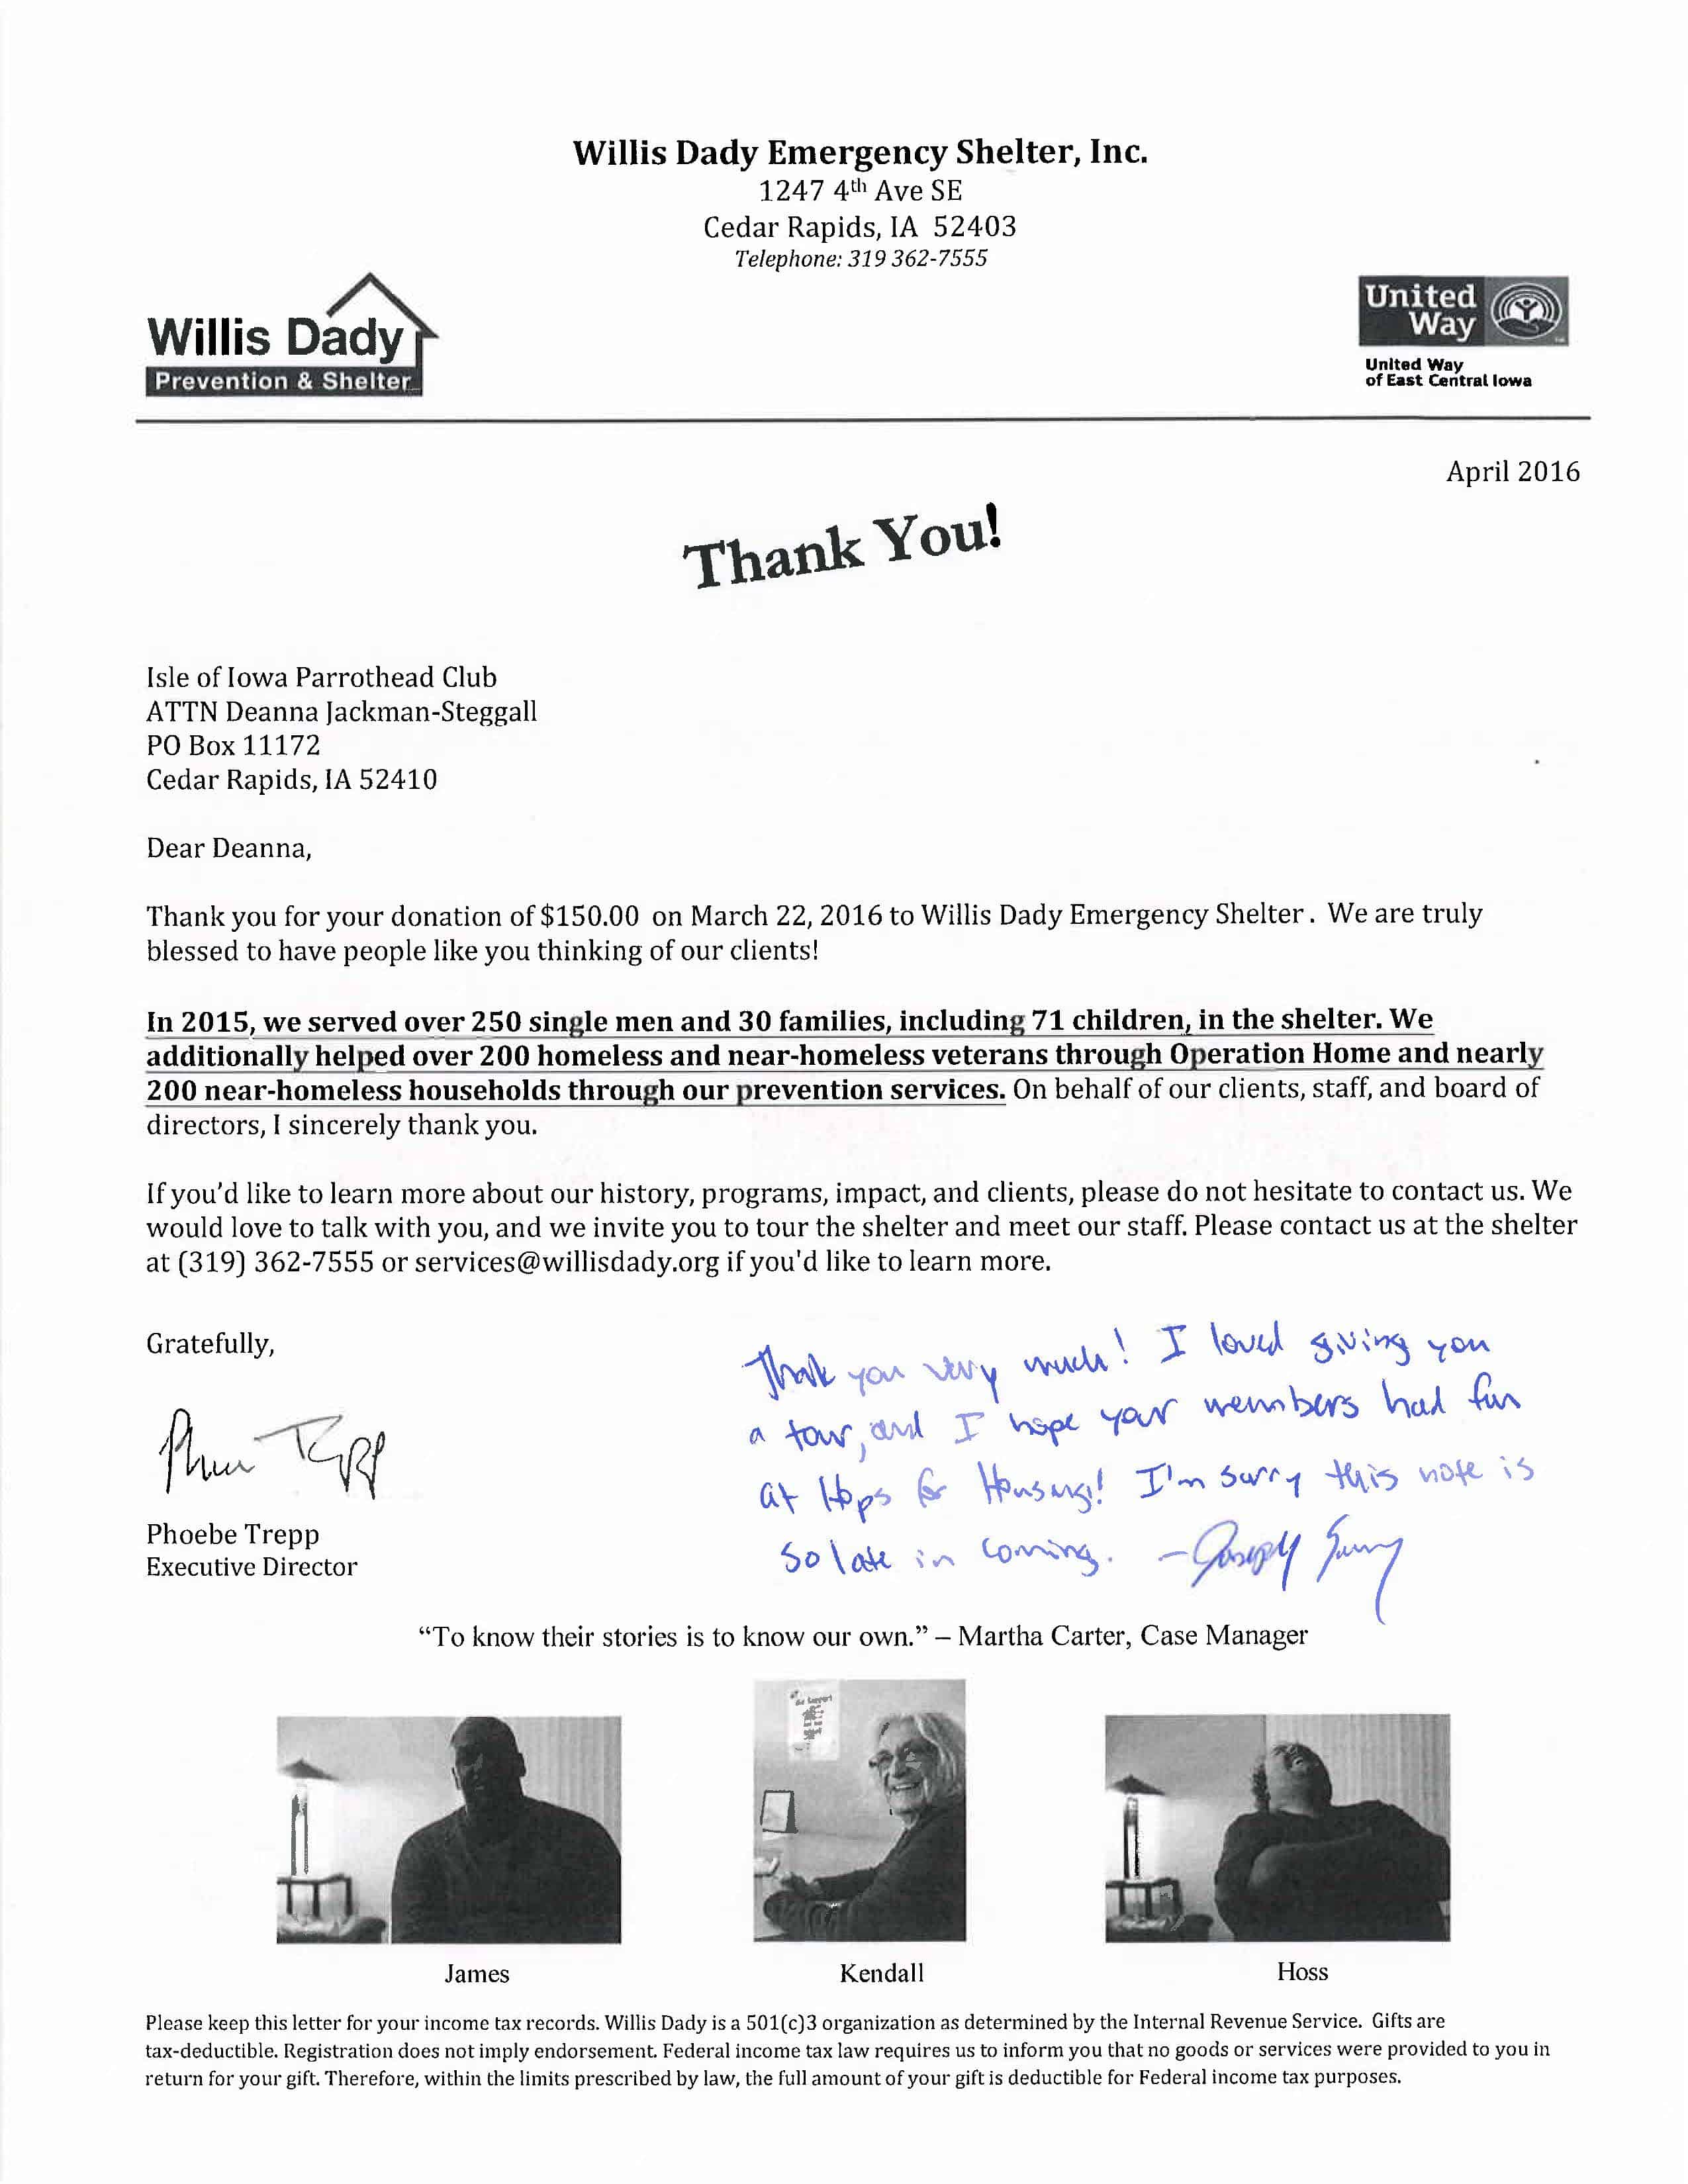 2016 Willis Dady Thank You Letter